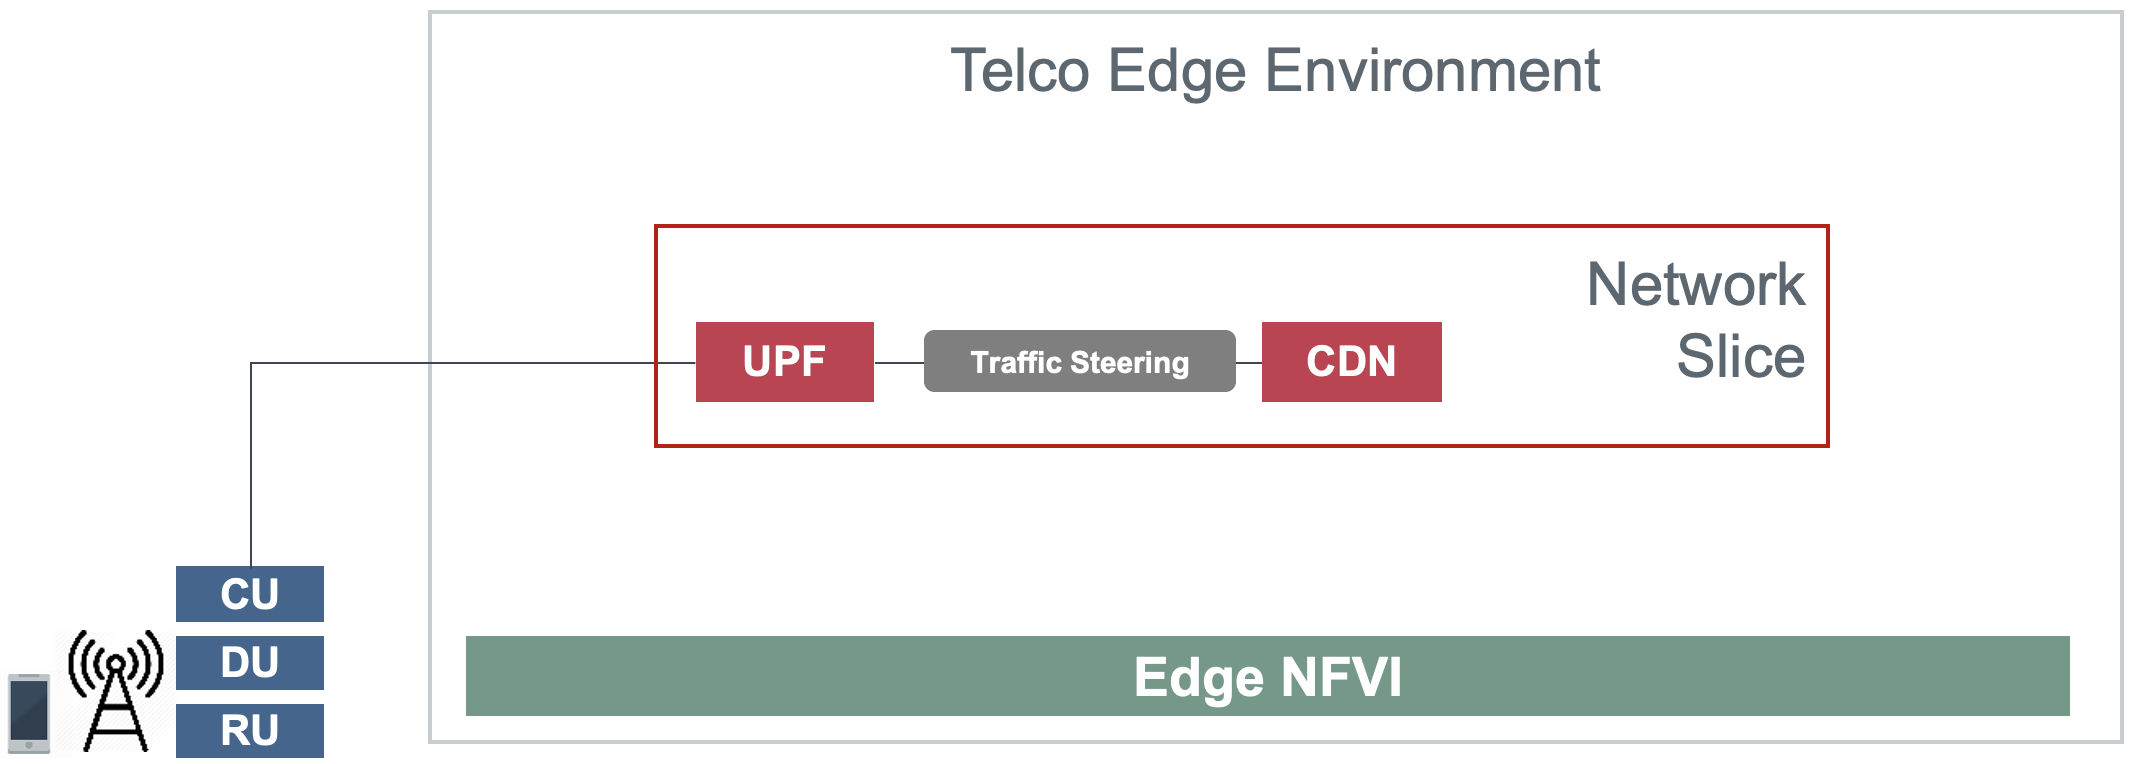 Edge CDN with eMBB Core Network Slicing